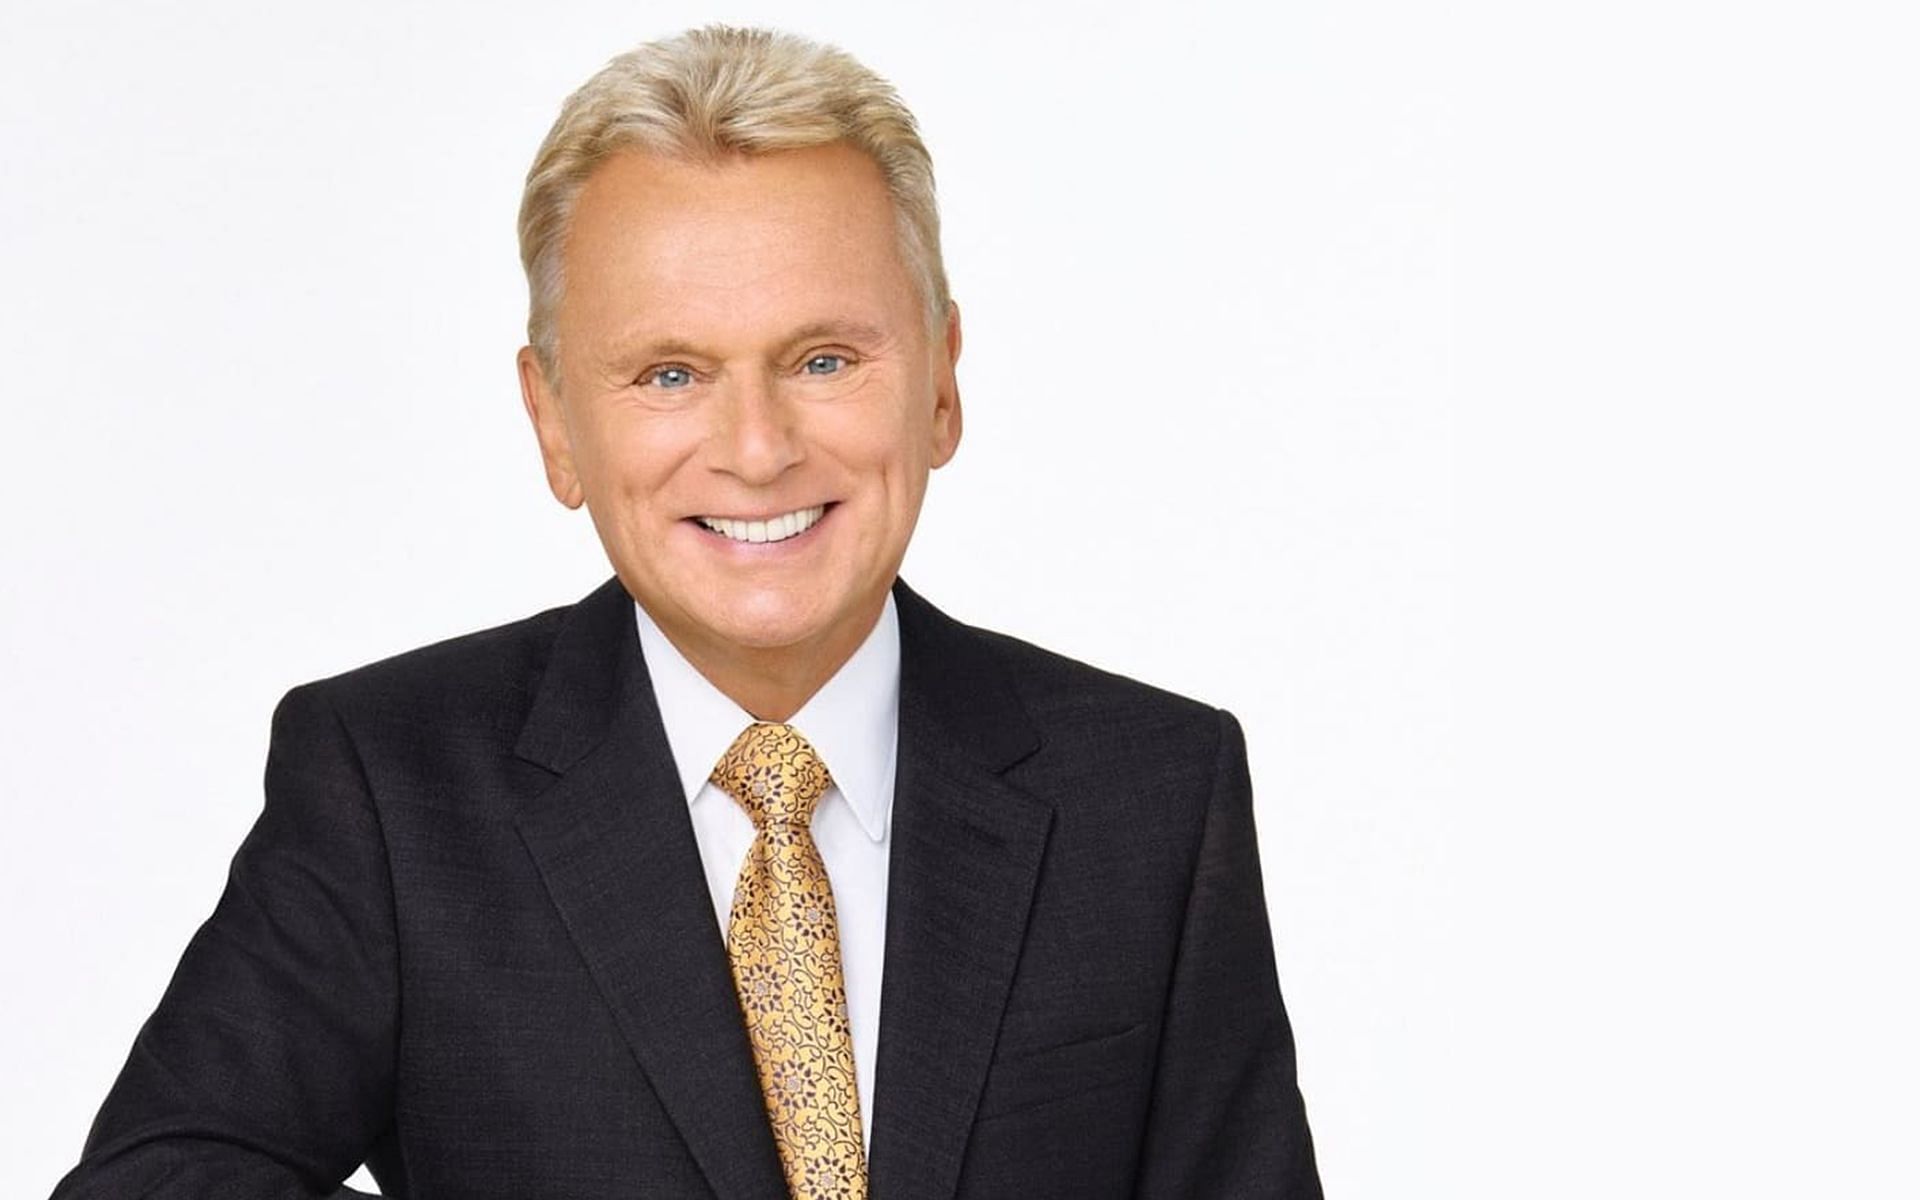 Pat Sajak irked the online community with his actions (Image via patsajakofficale/Instagram)